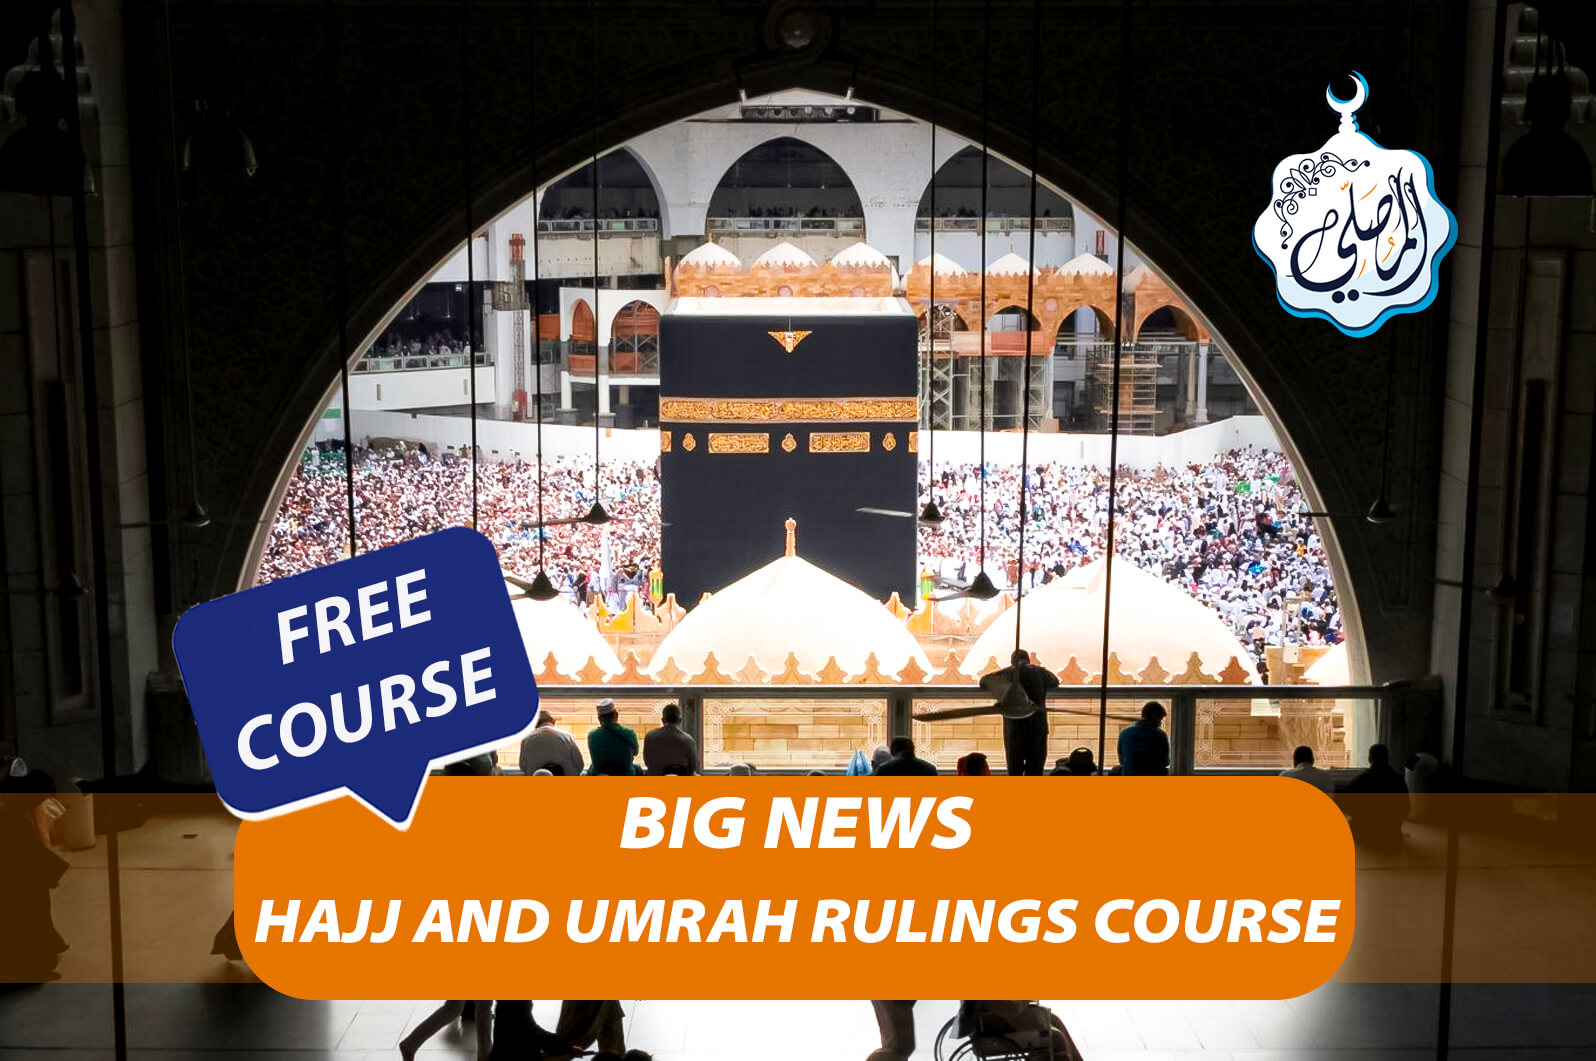 Free Hajj and Umrah rulings course with AlMosaly